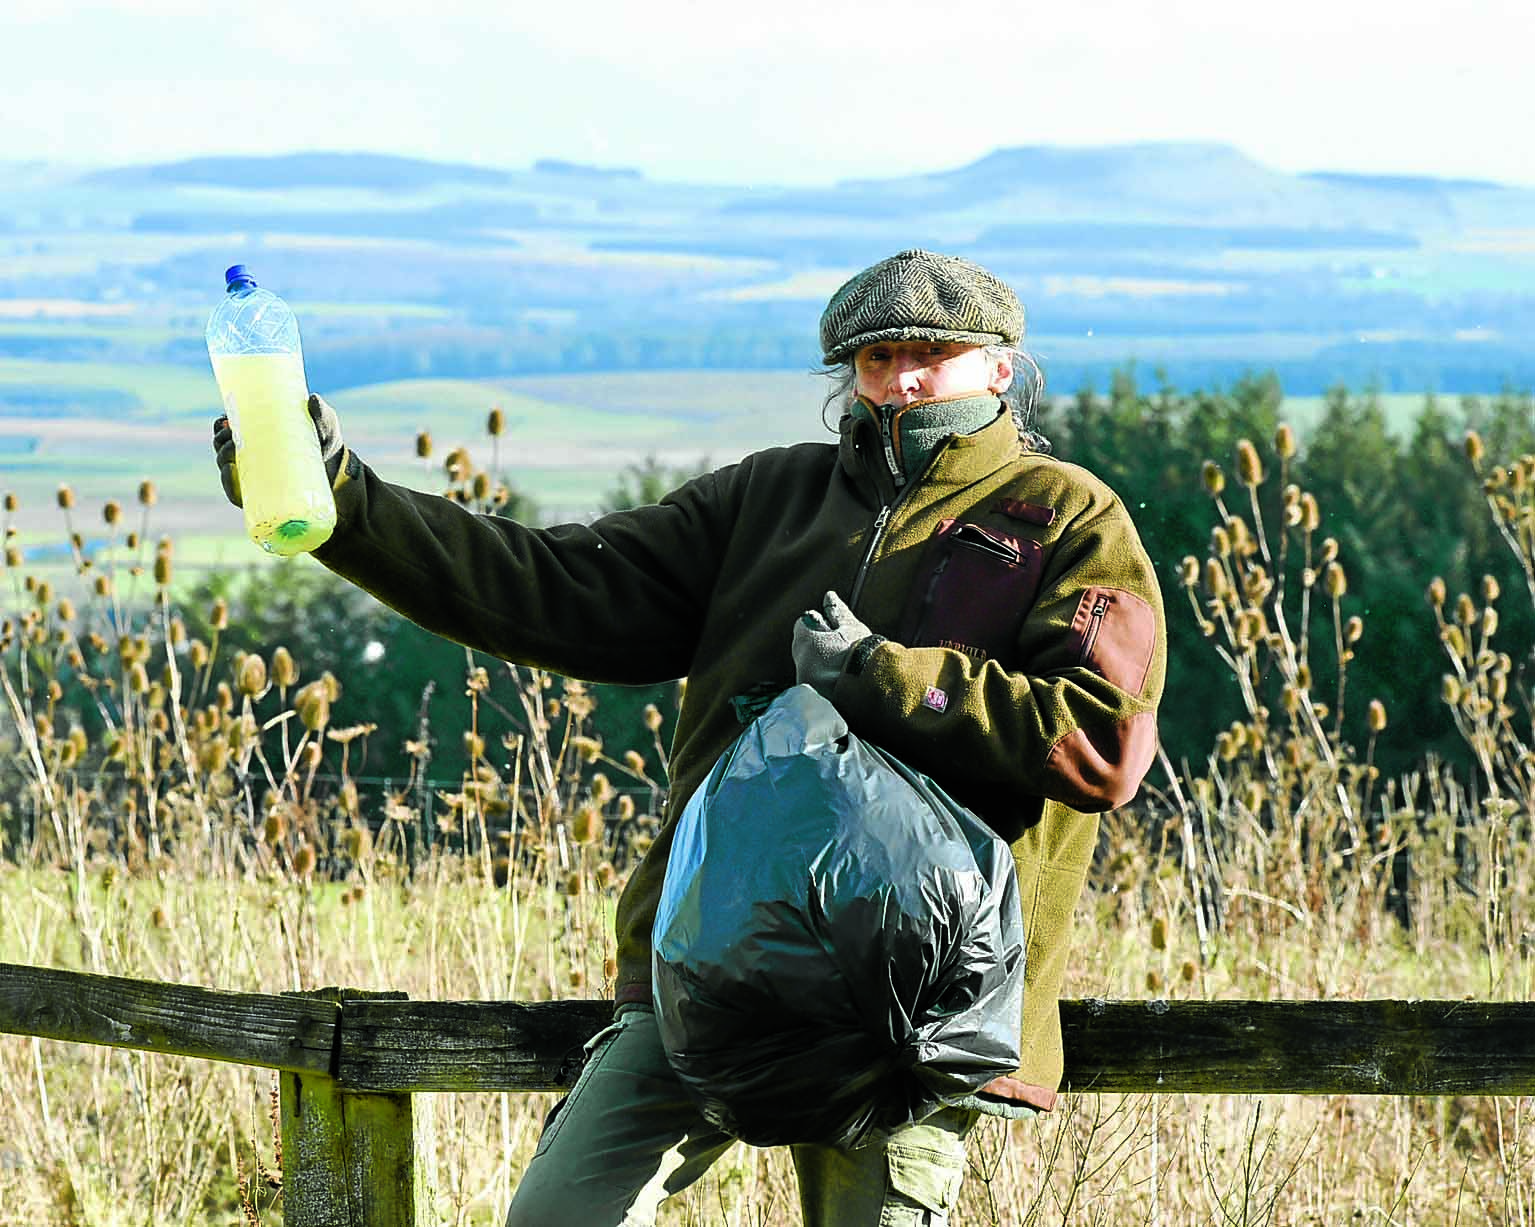 Pickers’ shock at urine bottle haul